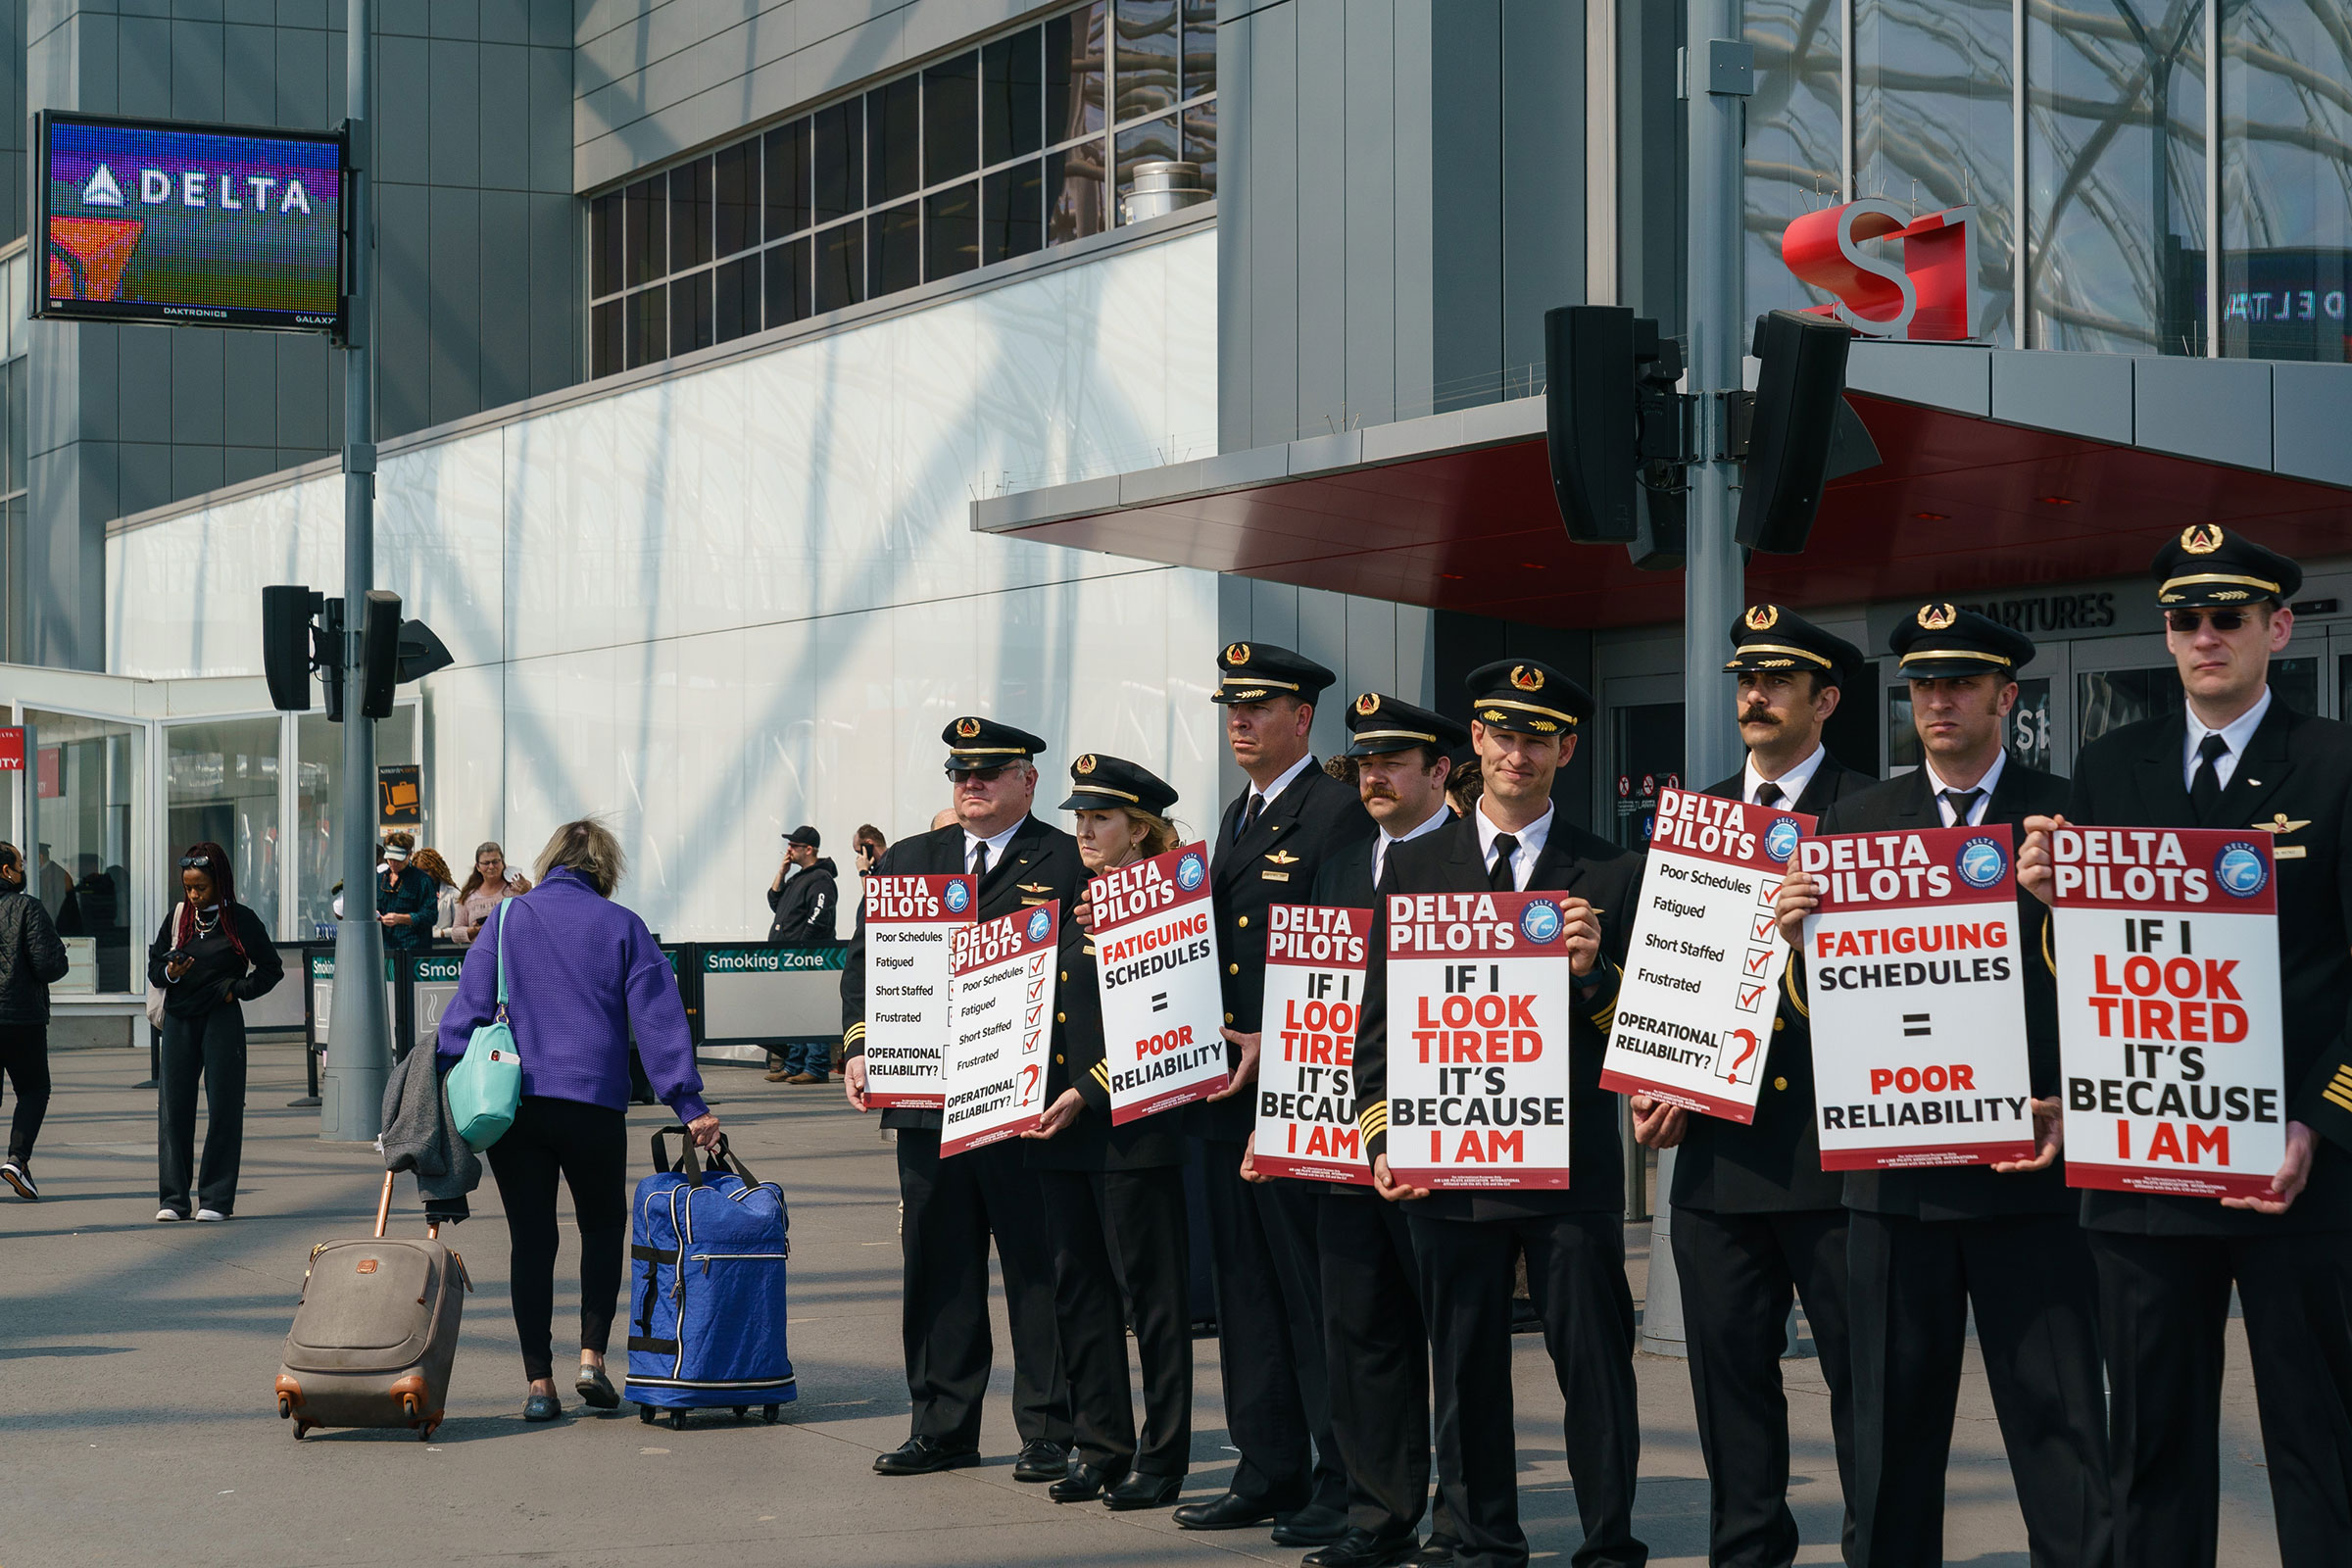 Members of the Air Line Pilots Association picket outside the Delta Air Lines check-in lobby at Hartsfield-Jackson International Airport in Atlanta, on March 10, 2022. (Elijah Nouvelage—Bloomberg/Getty Images)